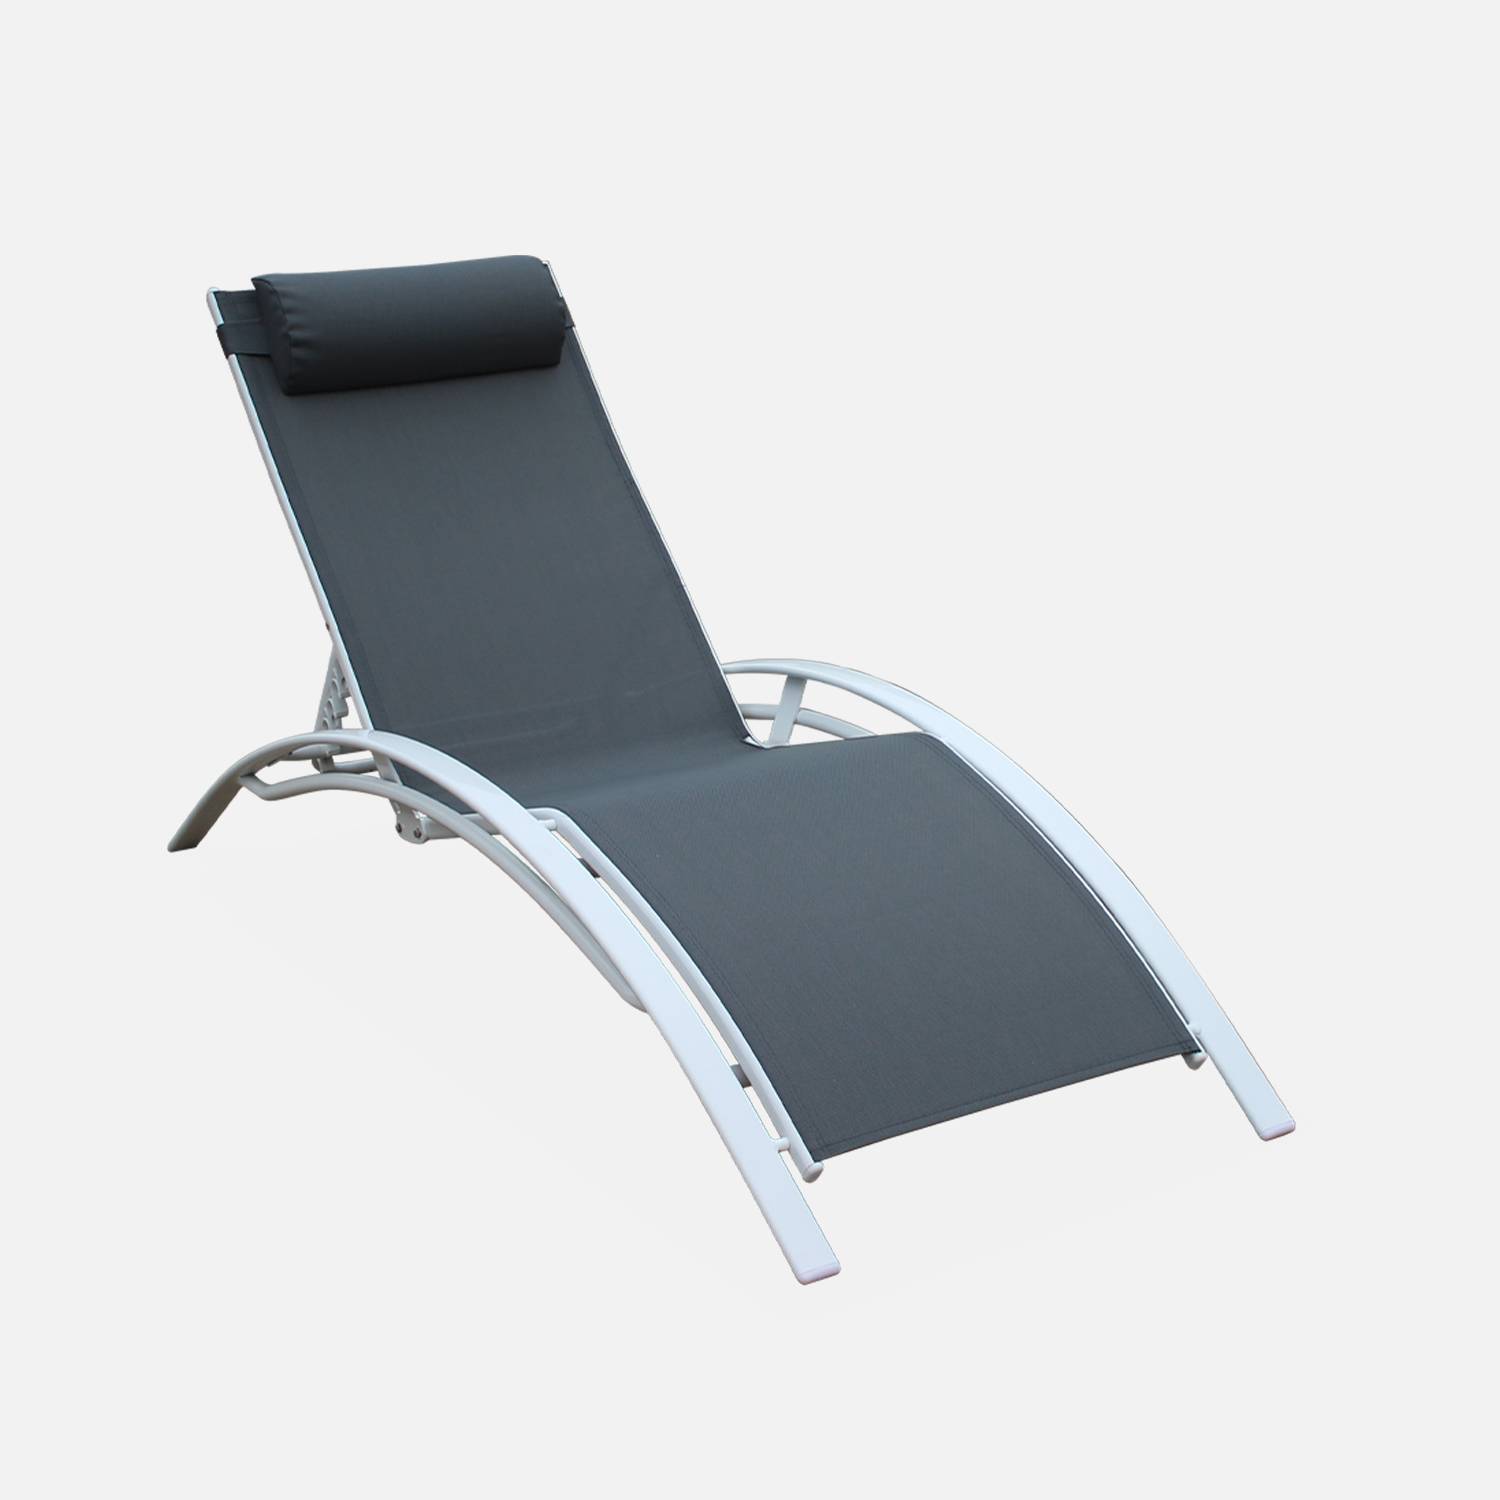 Pair of aluminium and textilene sun loungers, 4 reclining positions, headrest included, stackable - Louisa - White frame, Grey textilene Photo4